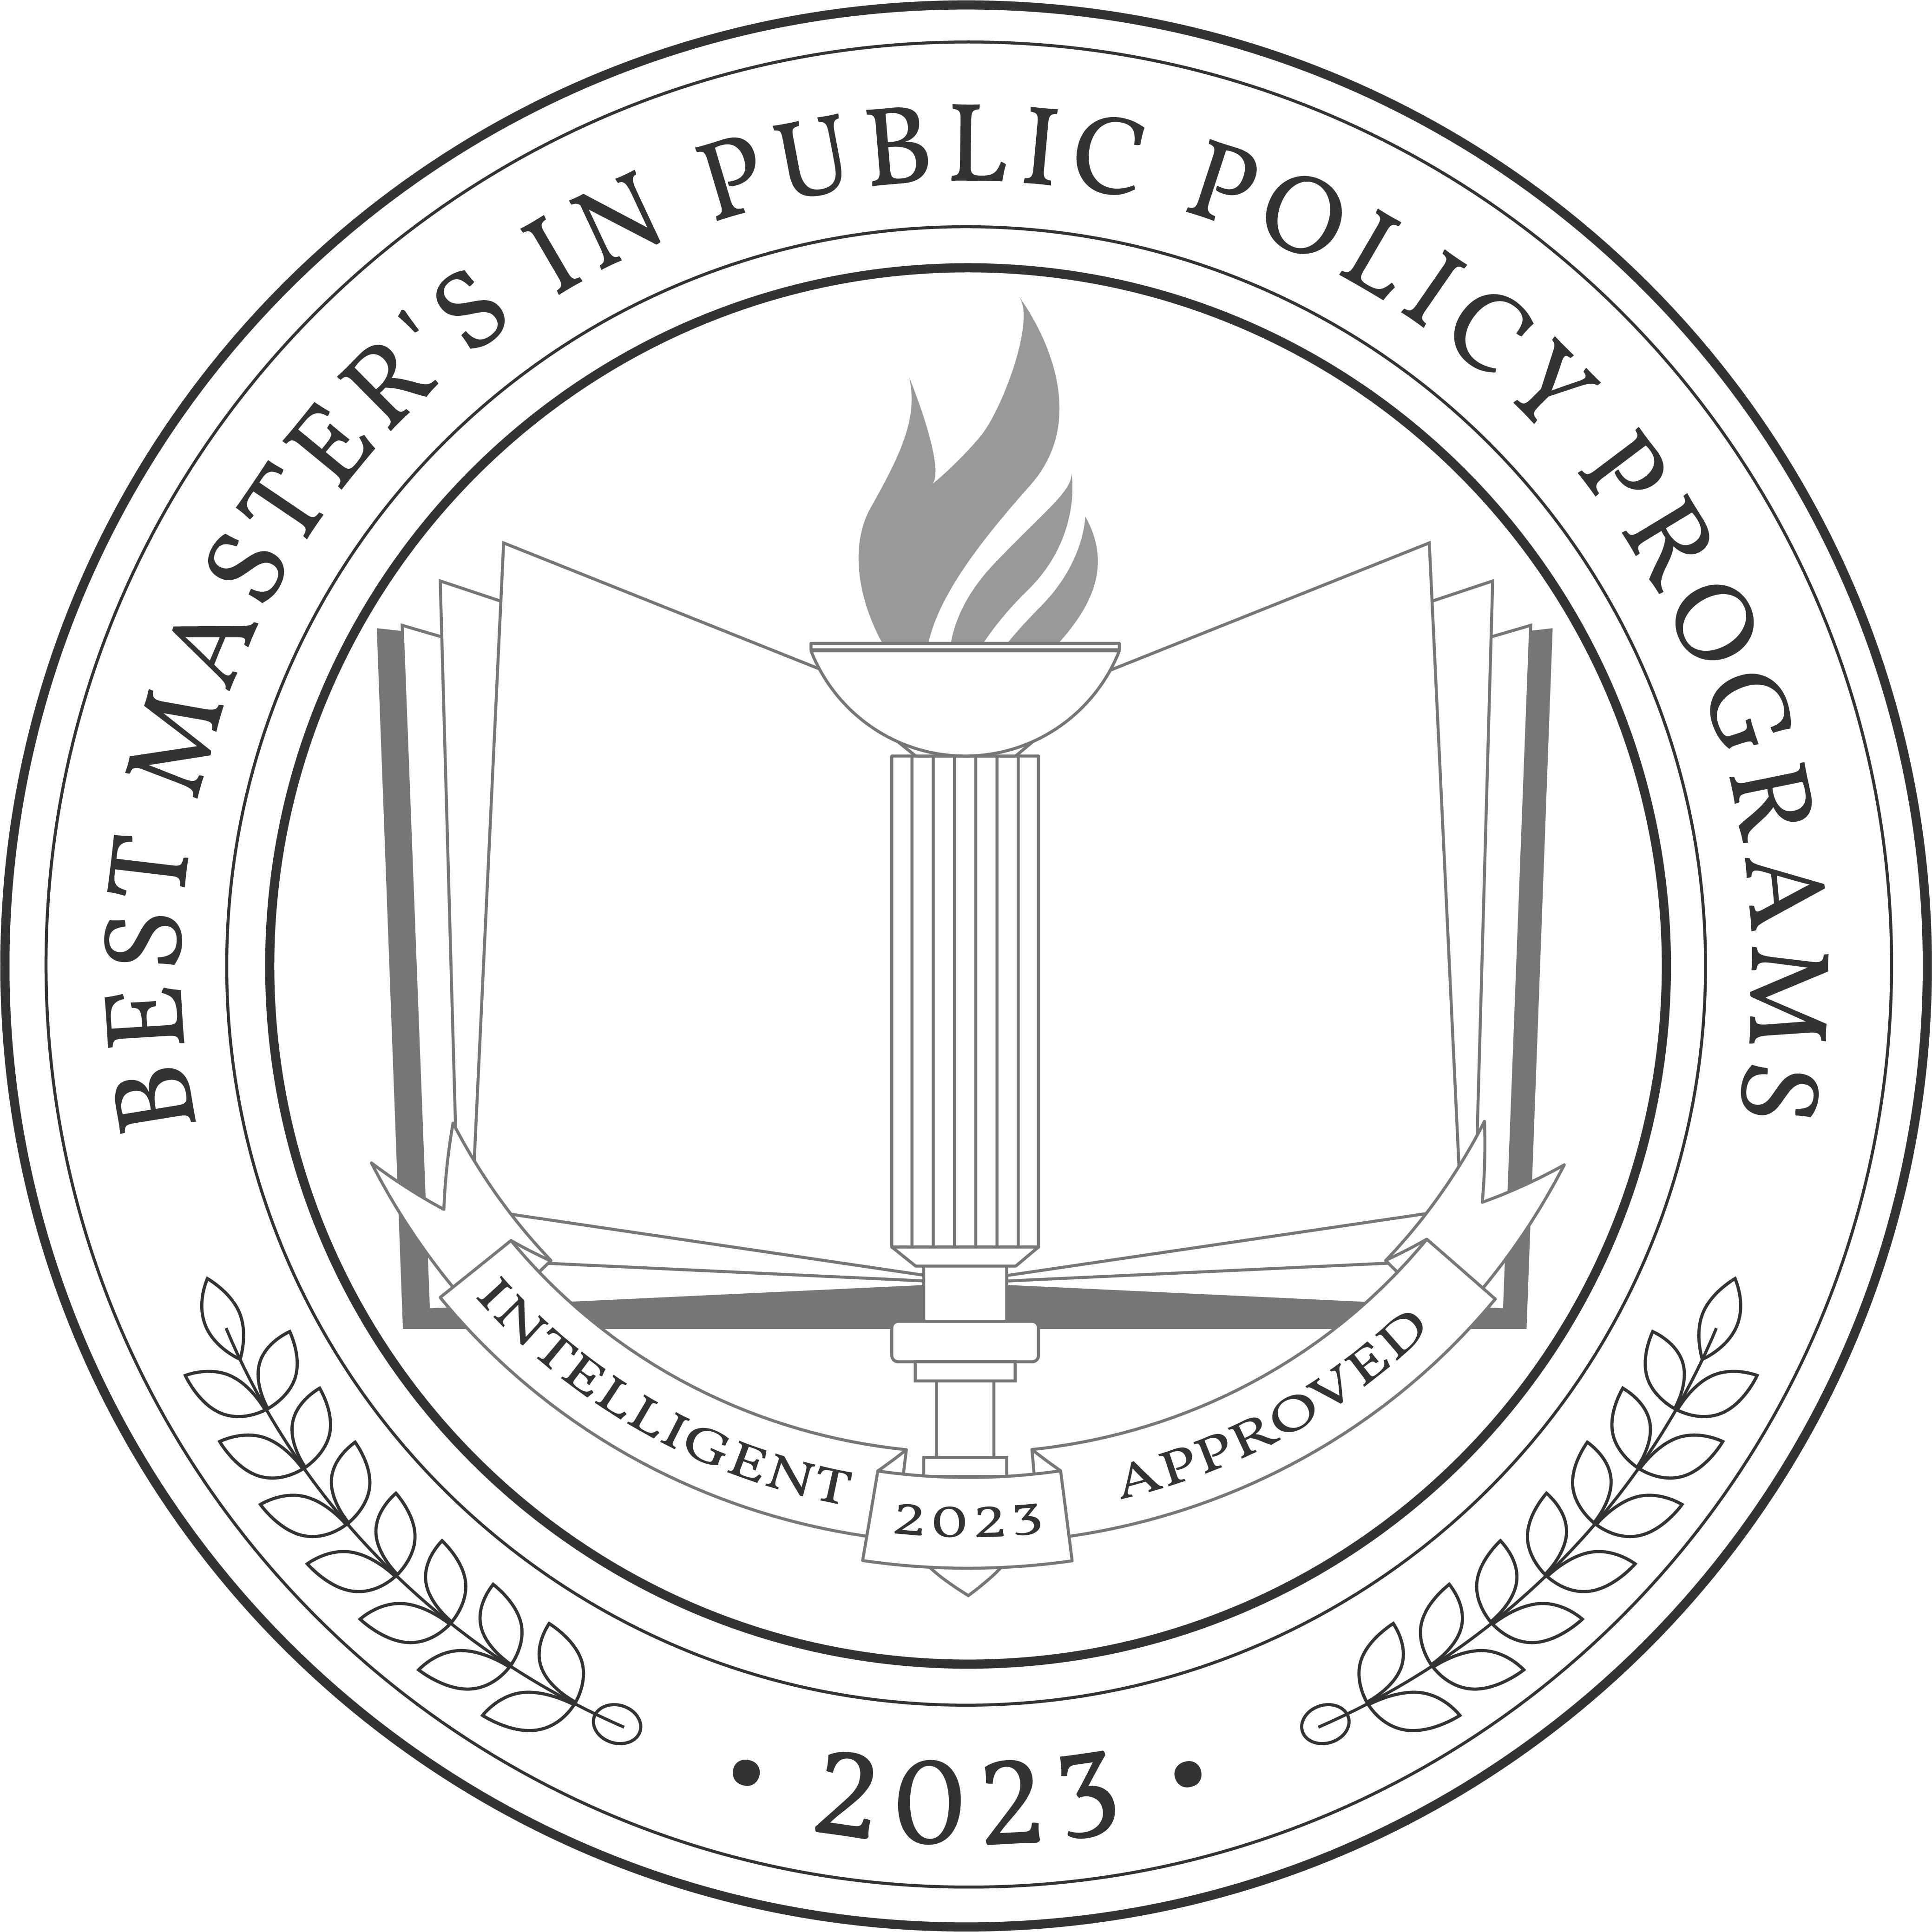 Best Master's in Public Policy Programs badge